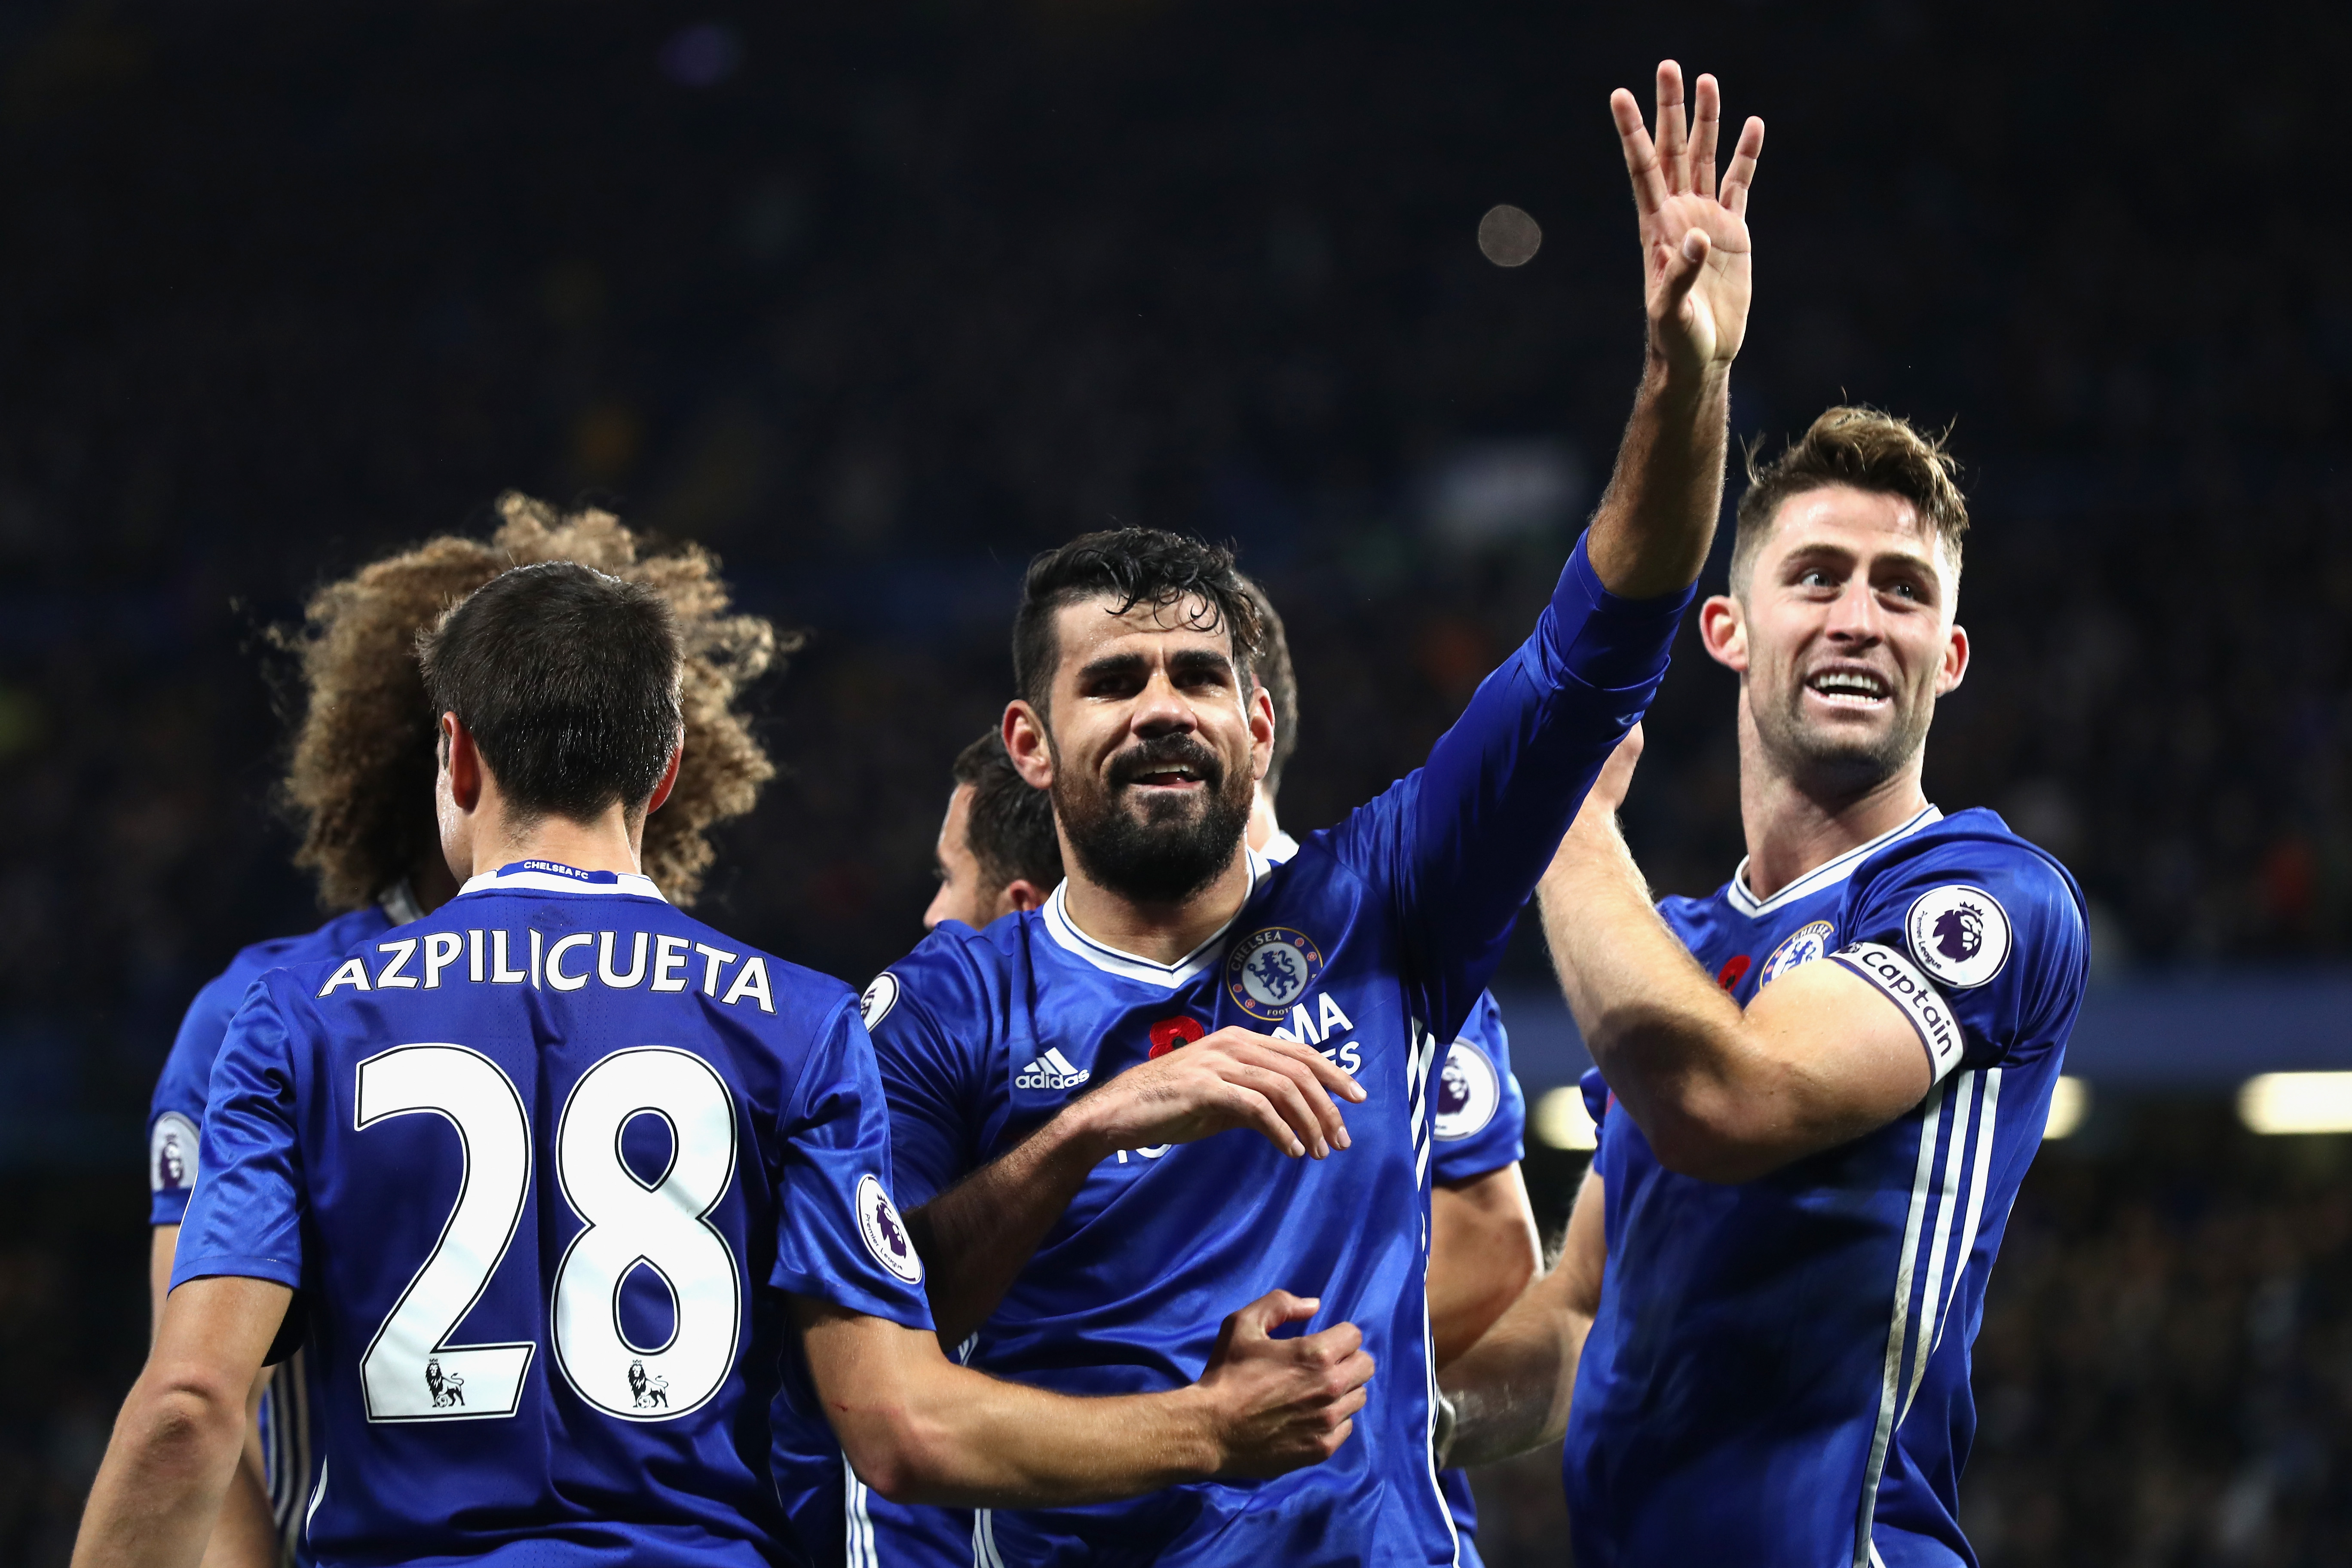 LONDON, ENGLAND - NOVEMBER 05: Diego Costa of Chelsea (C) celebrates scoring his sides third goal with his Chelsea team mates during the Premier League match between Chelsea and Everton at Stamford Bridge on November 5, 2016 in London, England.  (Photo by Clive Rose/Getty Images)